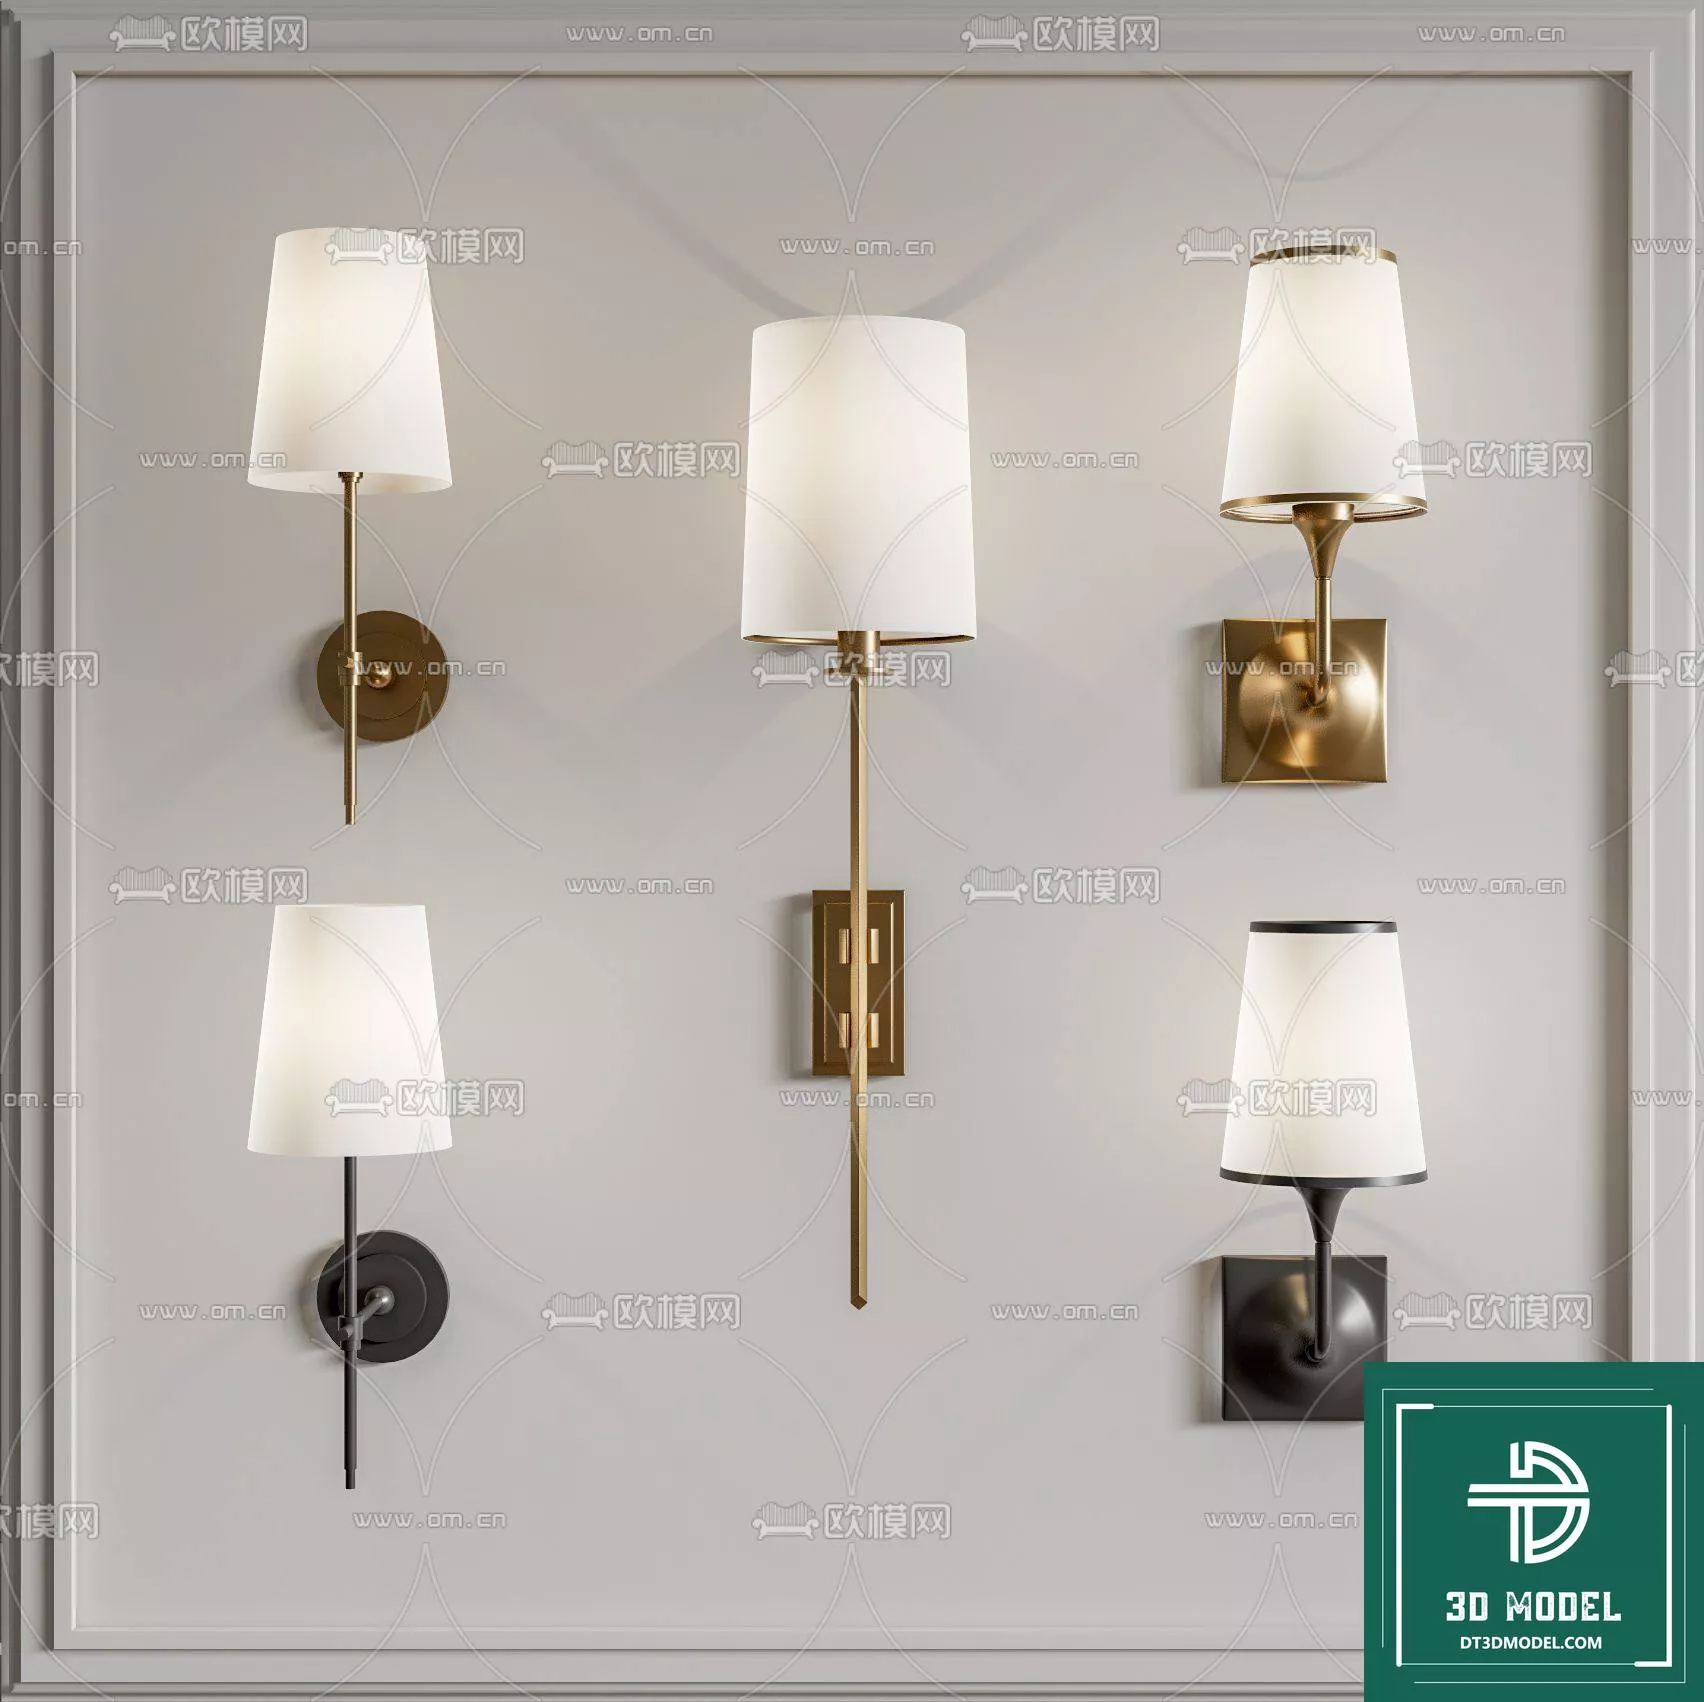 MODERN WALL LAMP - SKETCHUP 3D MODEL - VRAY OR ENSCAPE - ID16029